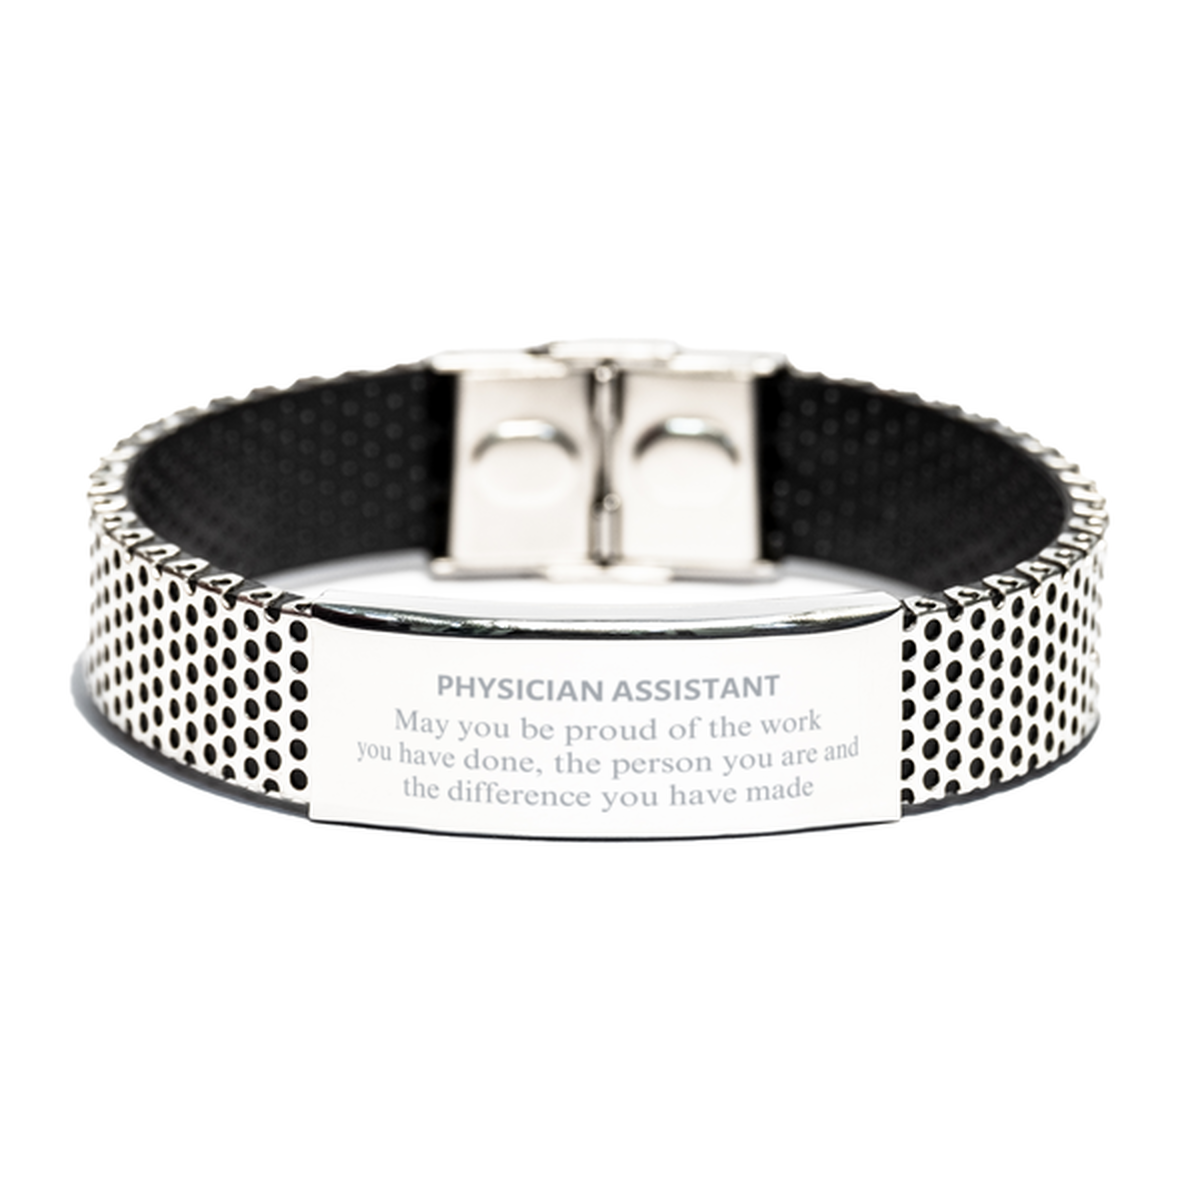 Physician Assistant May you be proud of the work you have done, Retirement Physician Assistant Stainless Steel Bracelet for Colleague Appreciation Gifts Amazing for Physician Assistant